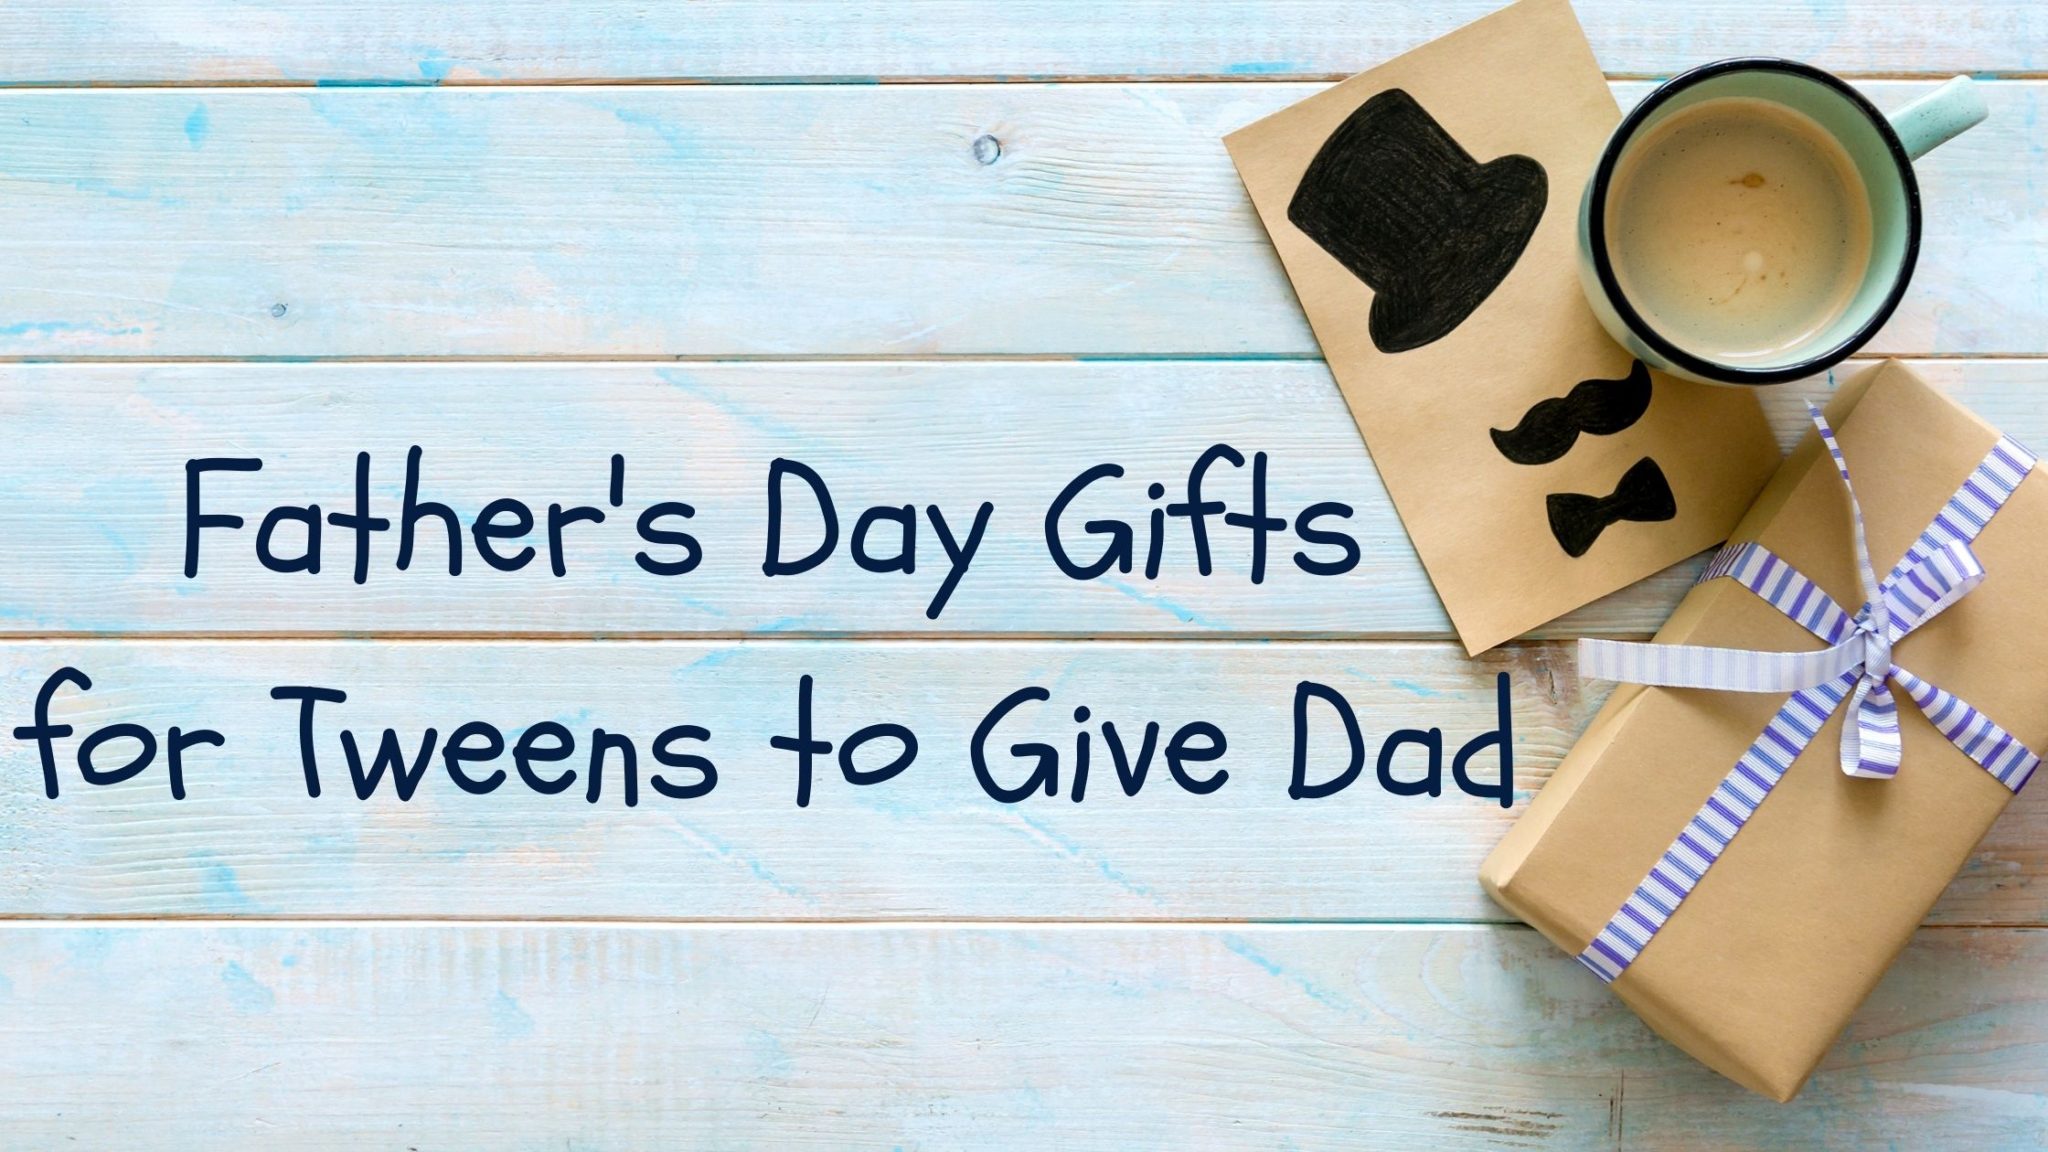 Father's Day Gifts for Tweens to Give Dad - The Secret Life of